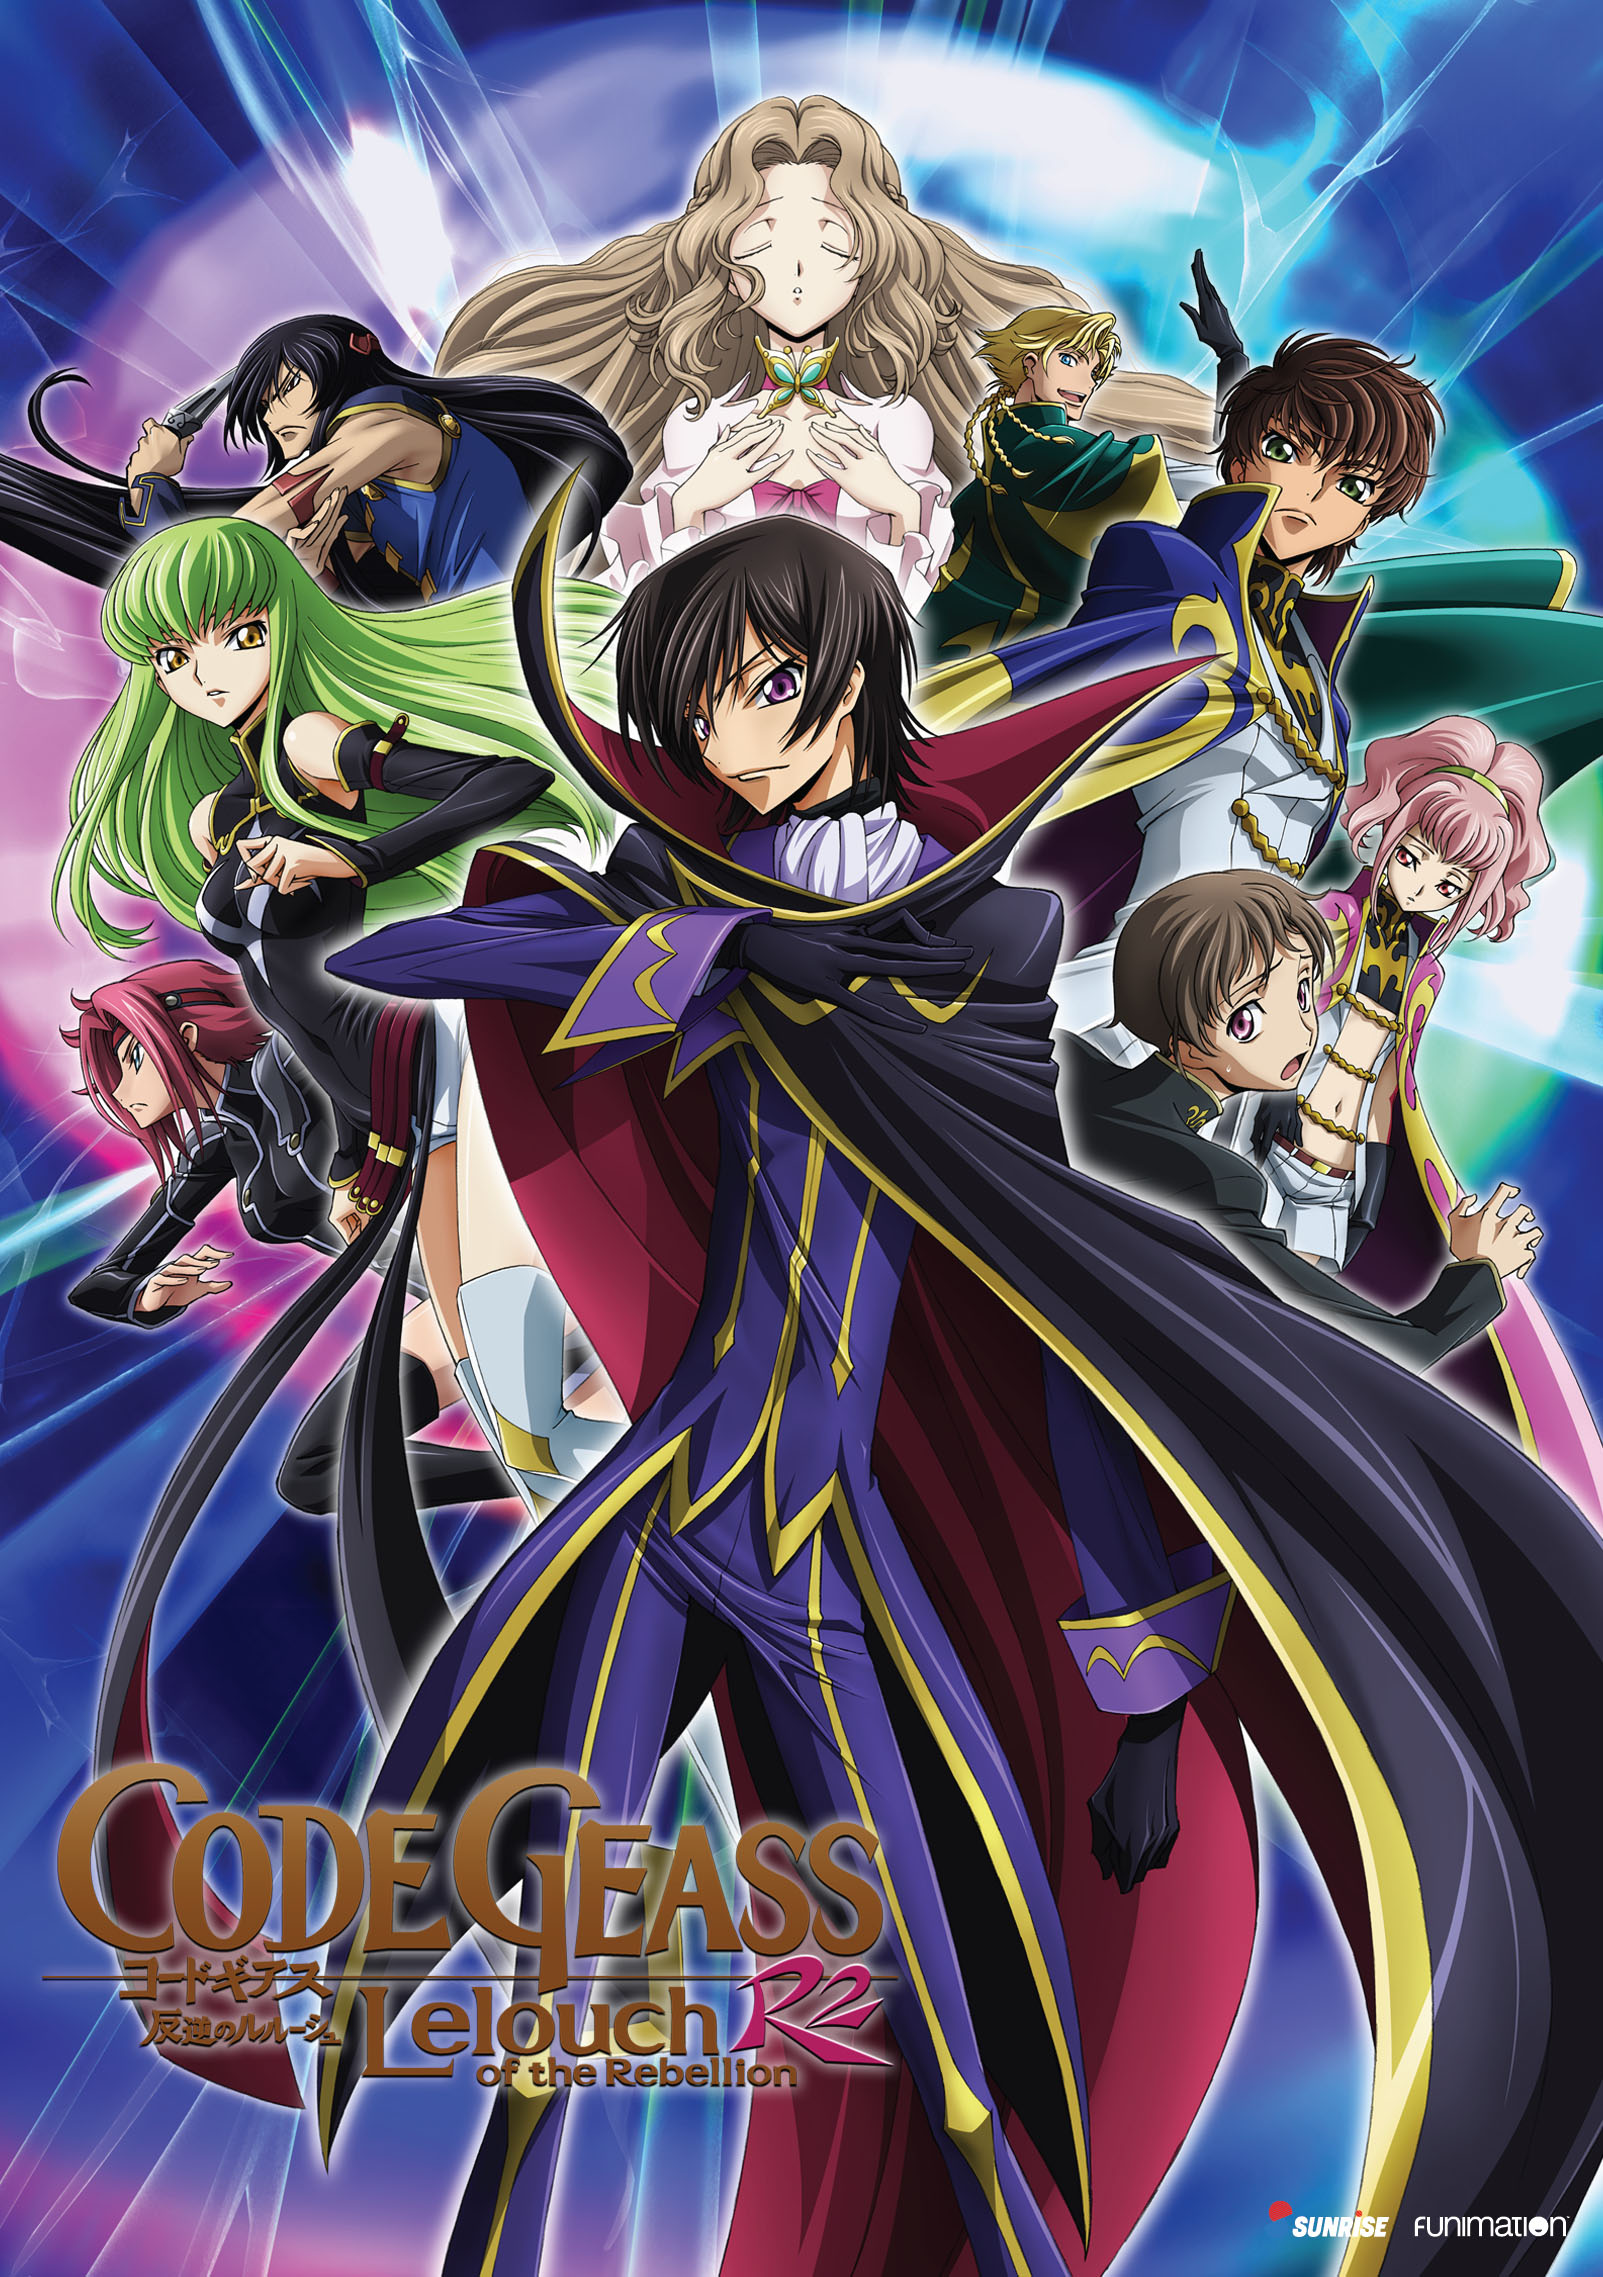 Best Buy: Code Geass: Lelouch of the Re;surrection The Movie [Blu-ray]  [2019]